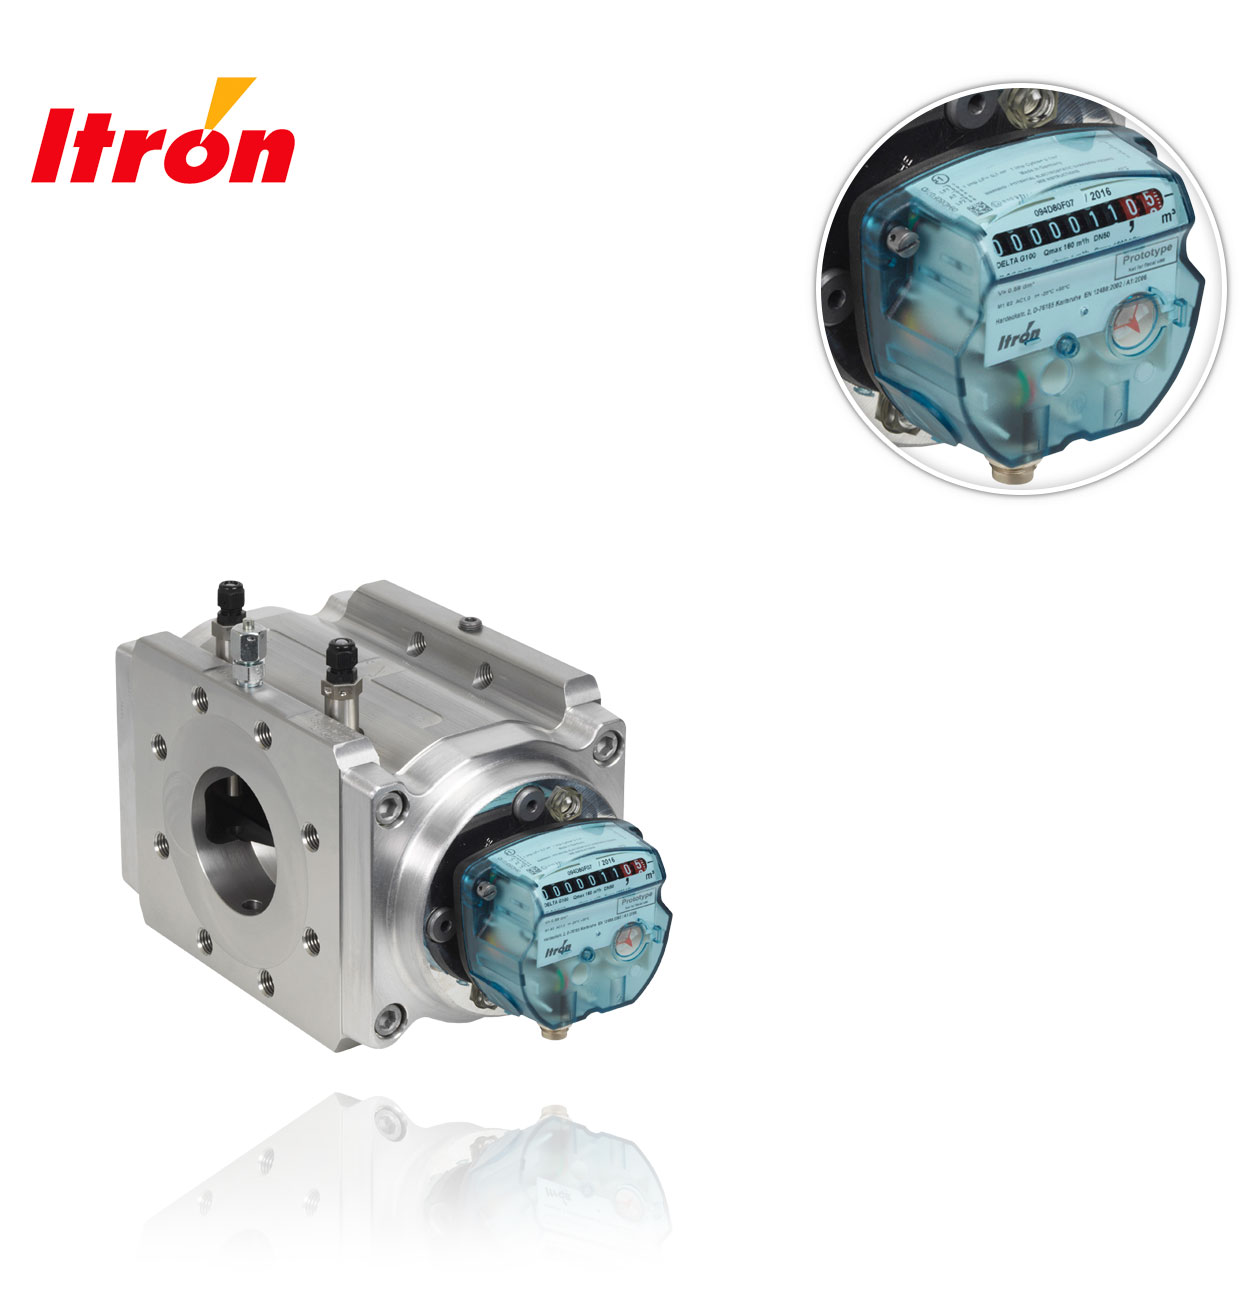 DELTA G40 DN50 maximum qty:65 DYNAMIC:160 LENGTH:171mm ITRON EXTENDED DYNAMIC ROTARY PISTON METER